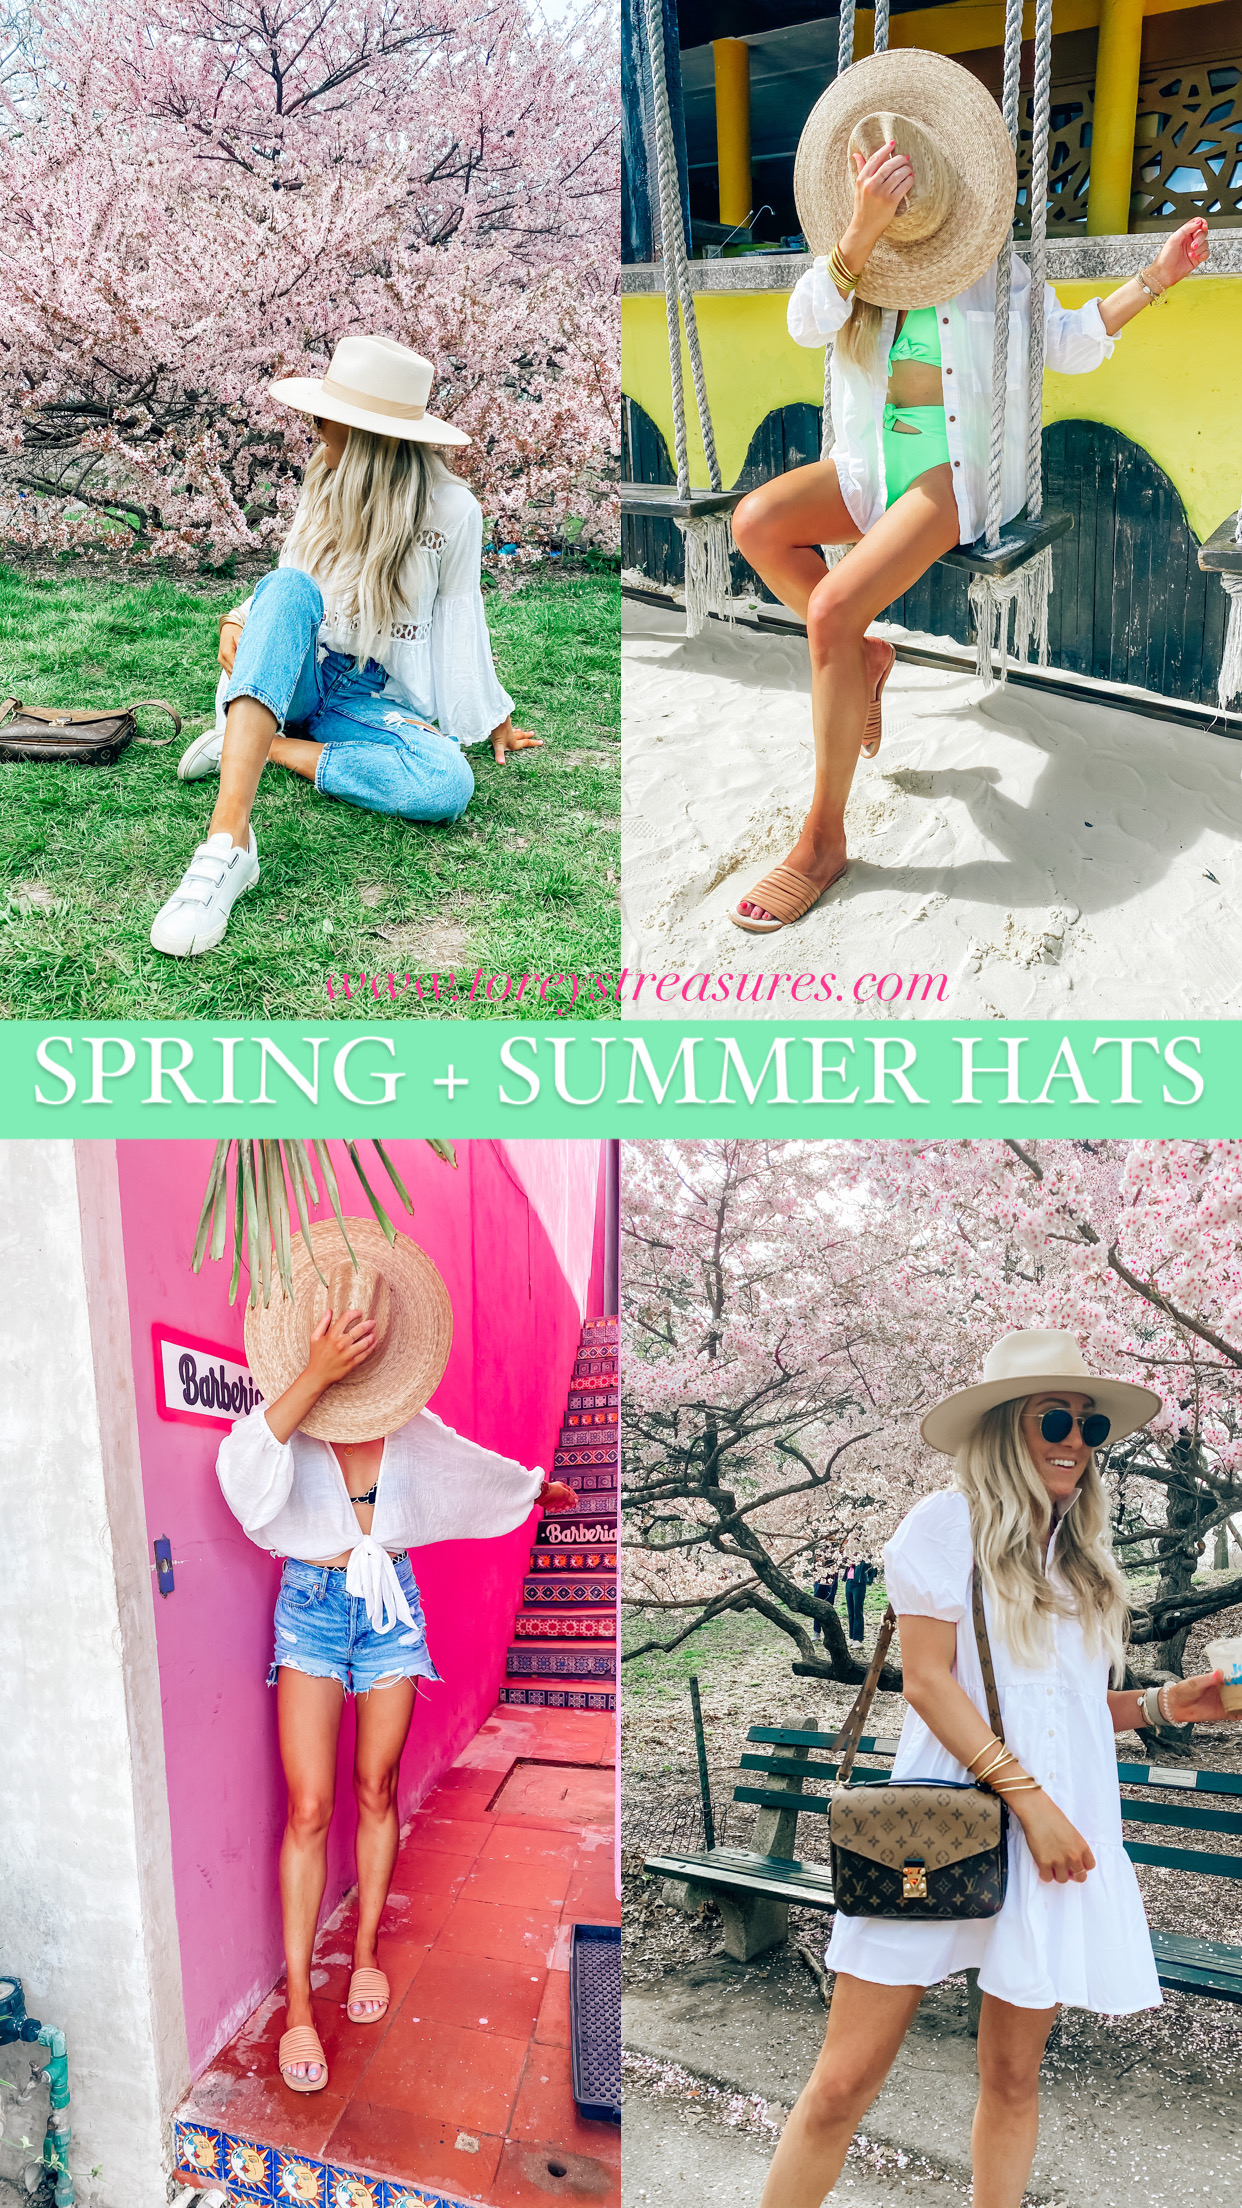 A Complete Guide To Spring-Summer Hat Styles